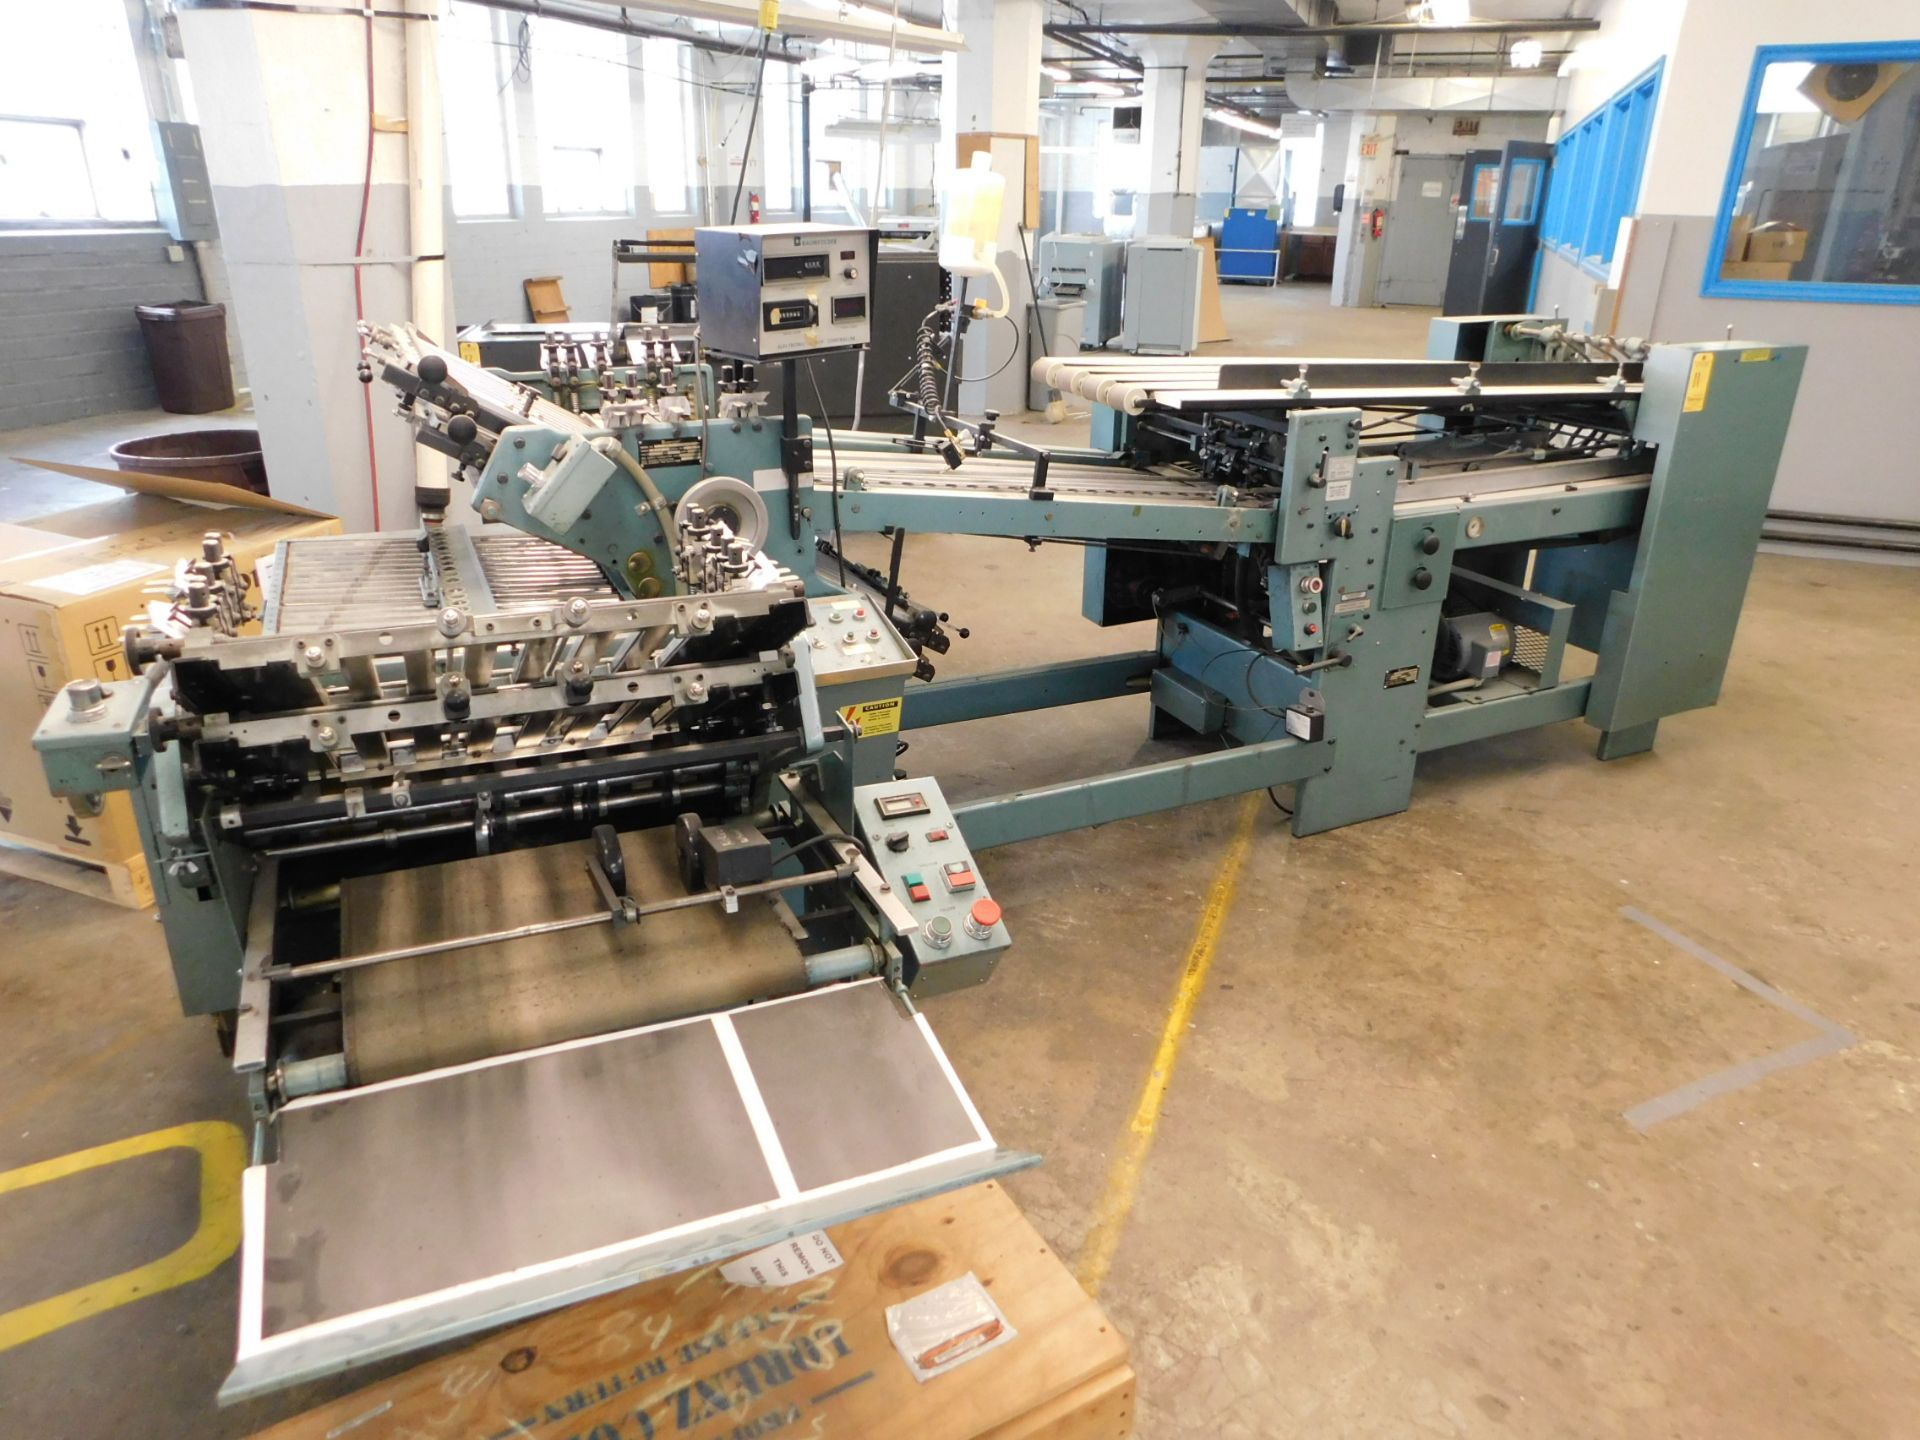 Baumfolder 720 - 20 x 26 700B folder with 8 page unit, includes 700B - 20 x 20 8pp folding unit with